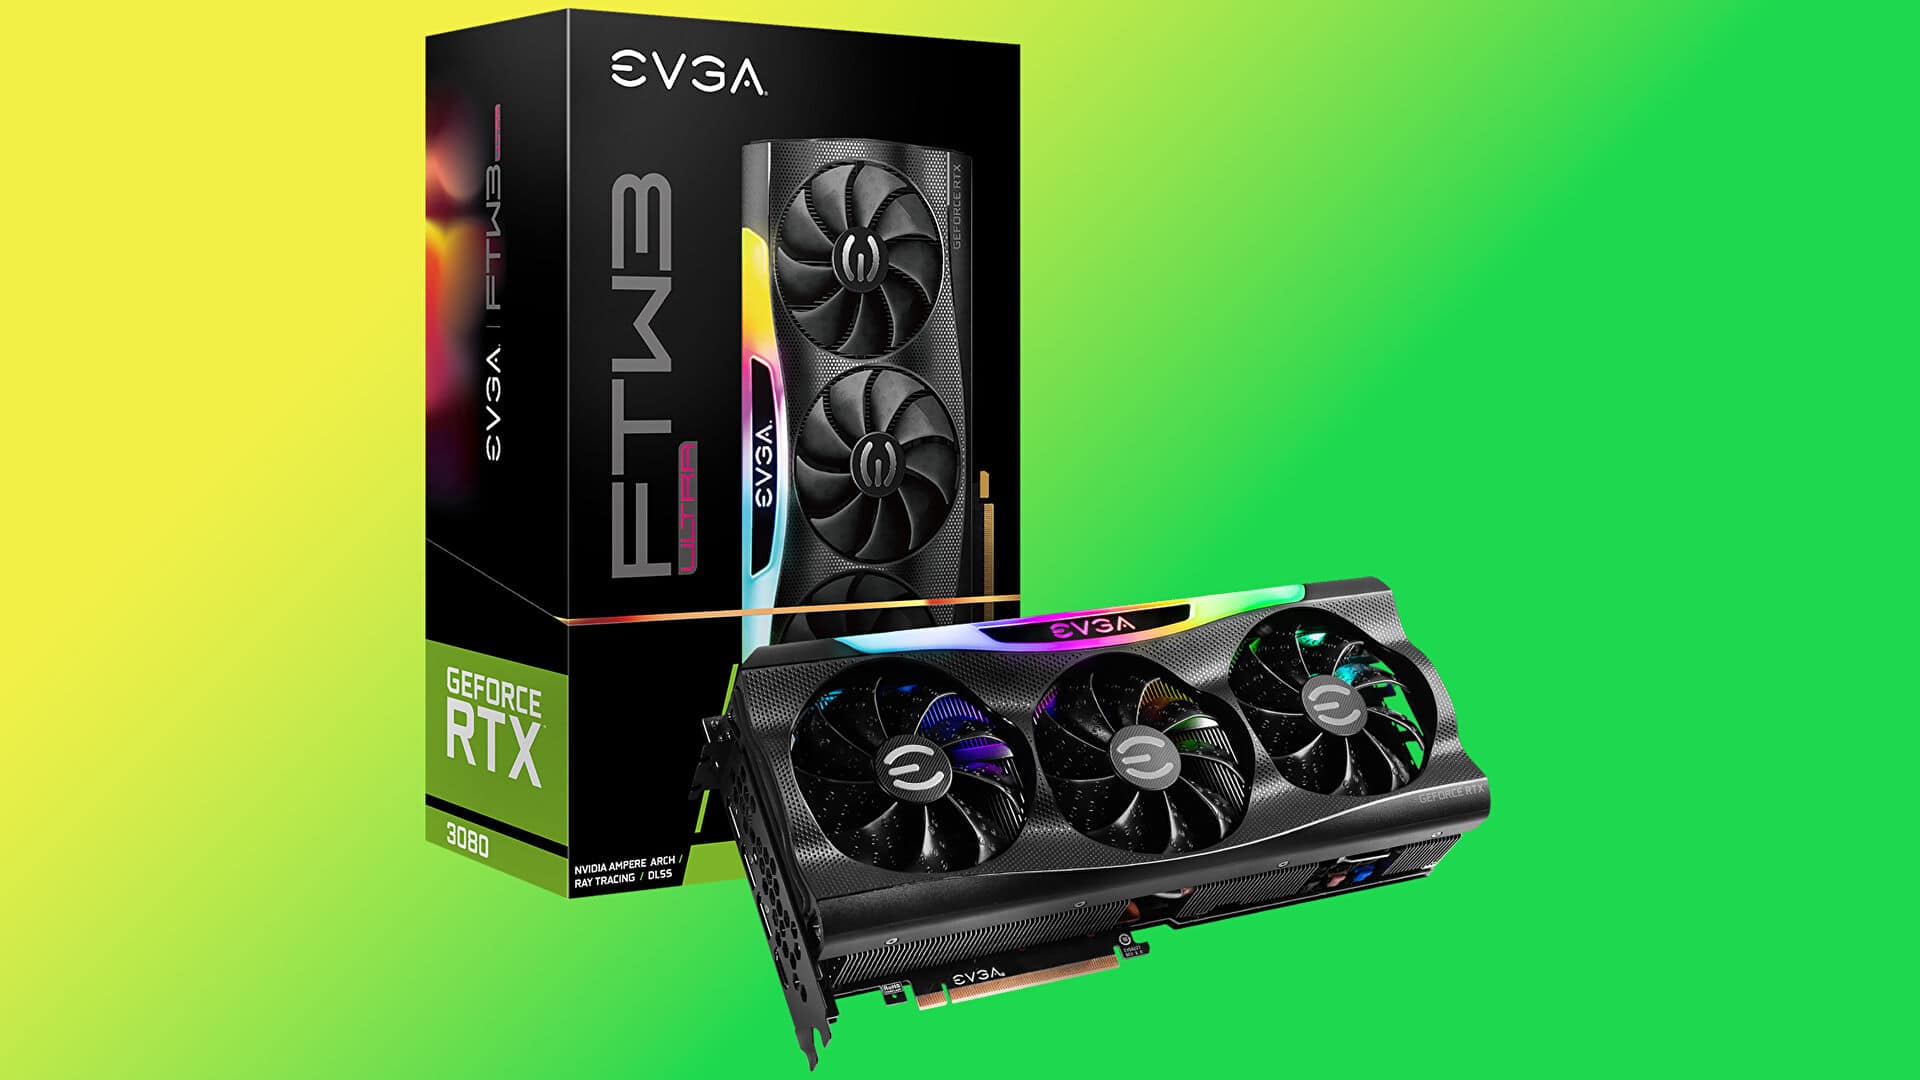 This EVGA RTX 3080 graphics card has dropped to $889 at Newegg - $110 less than it was last week